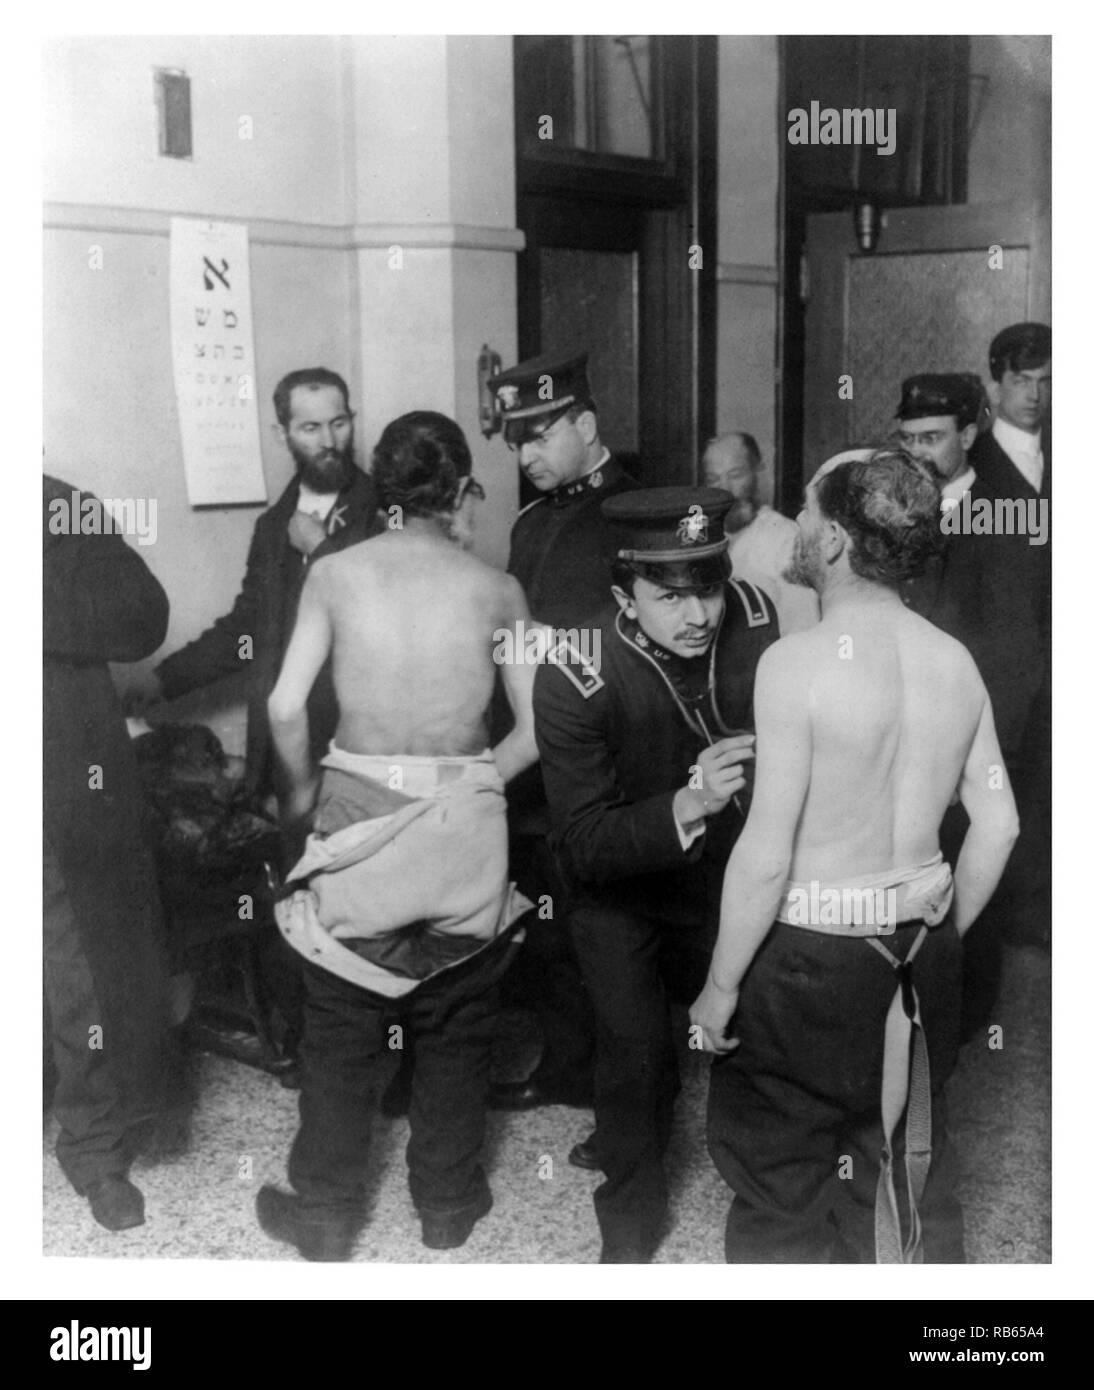 Physicians examining a group of Jewish immigrants who are gathered in small room. Two of the patients have their shirts off and are being examined by physicians while an eye chart written in Hebrew hangs on the wall - possibly taken on Ellis Island. Stock Photo